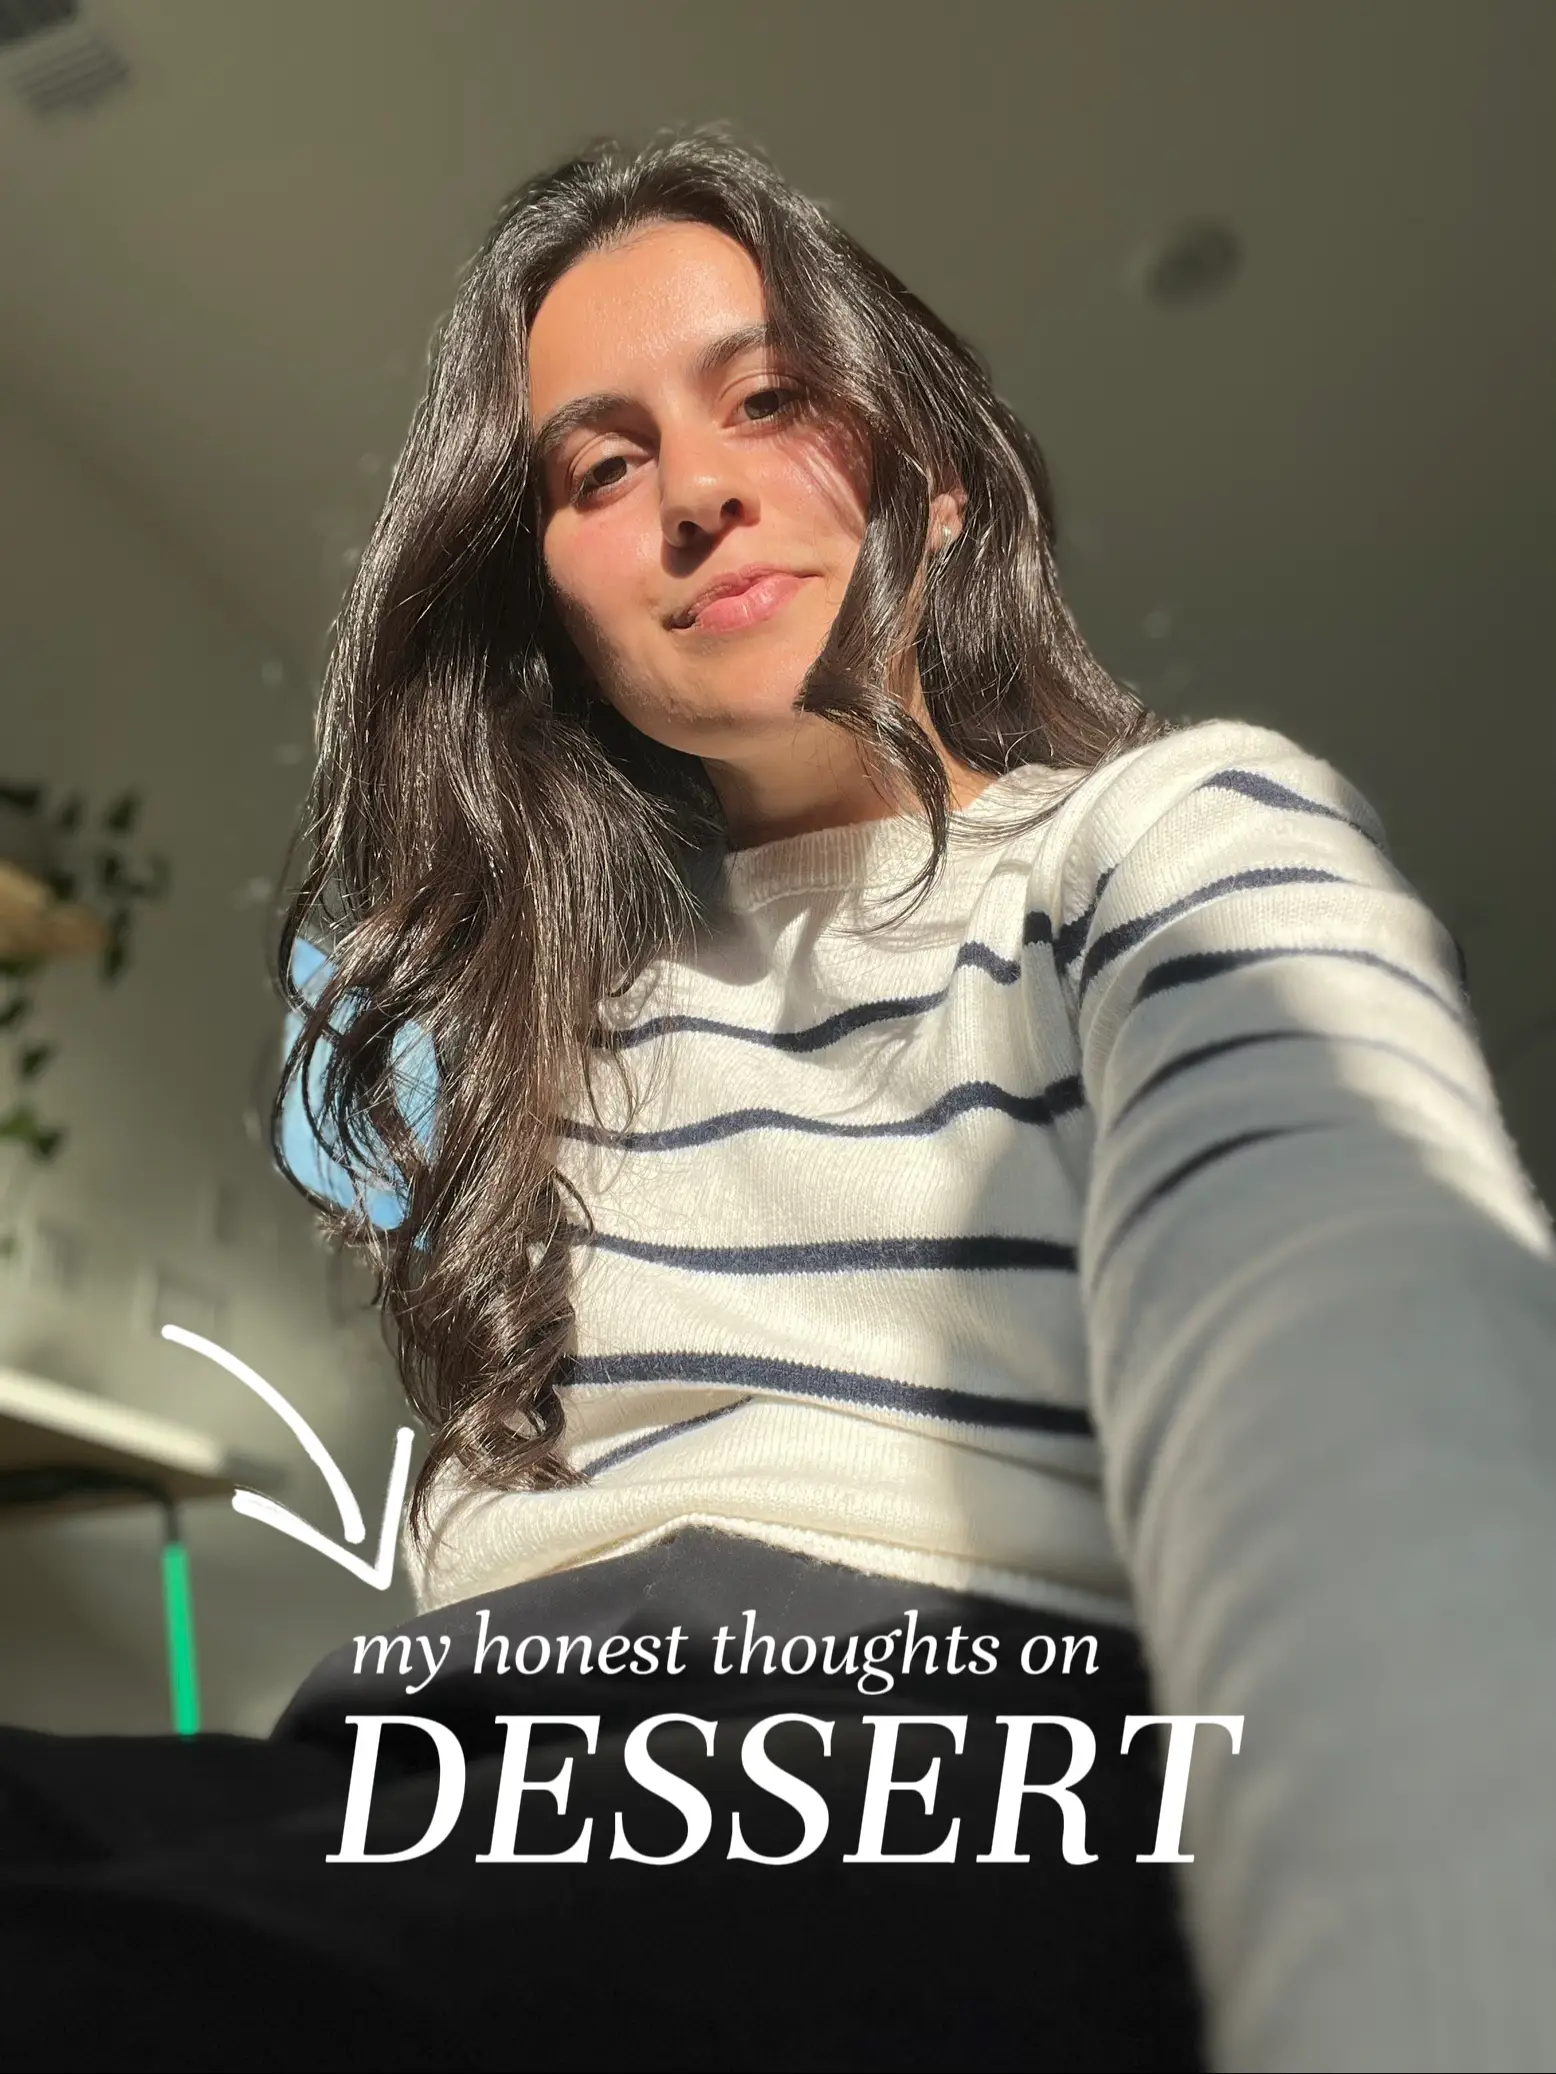 My thoughts on dessert every day…